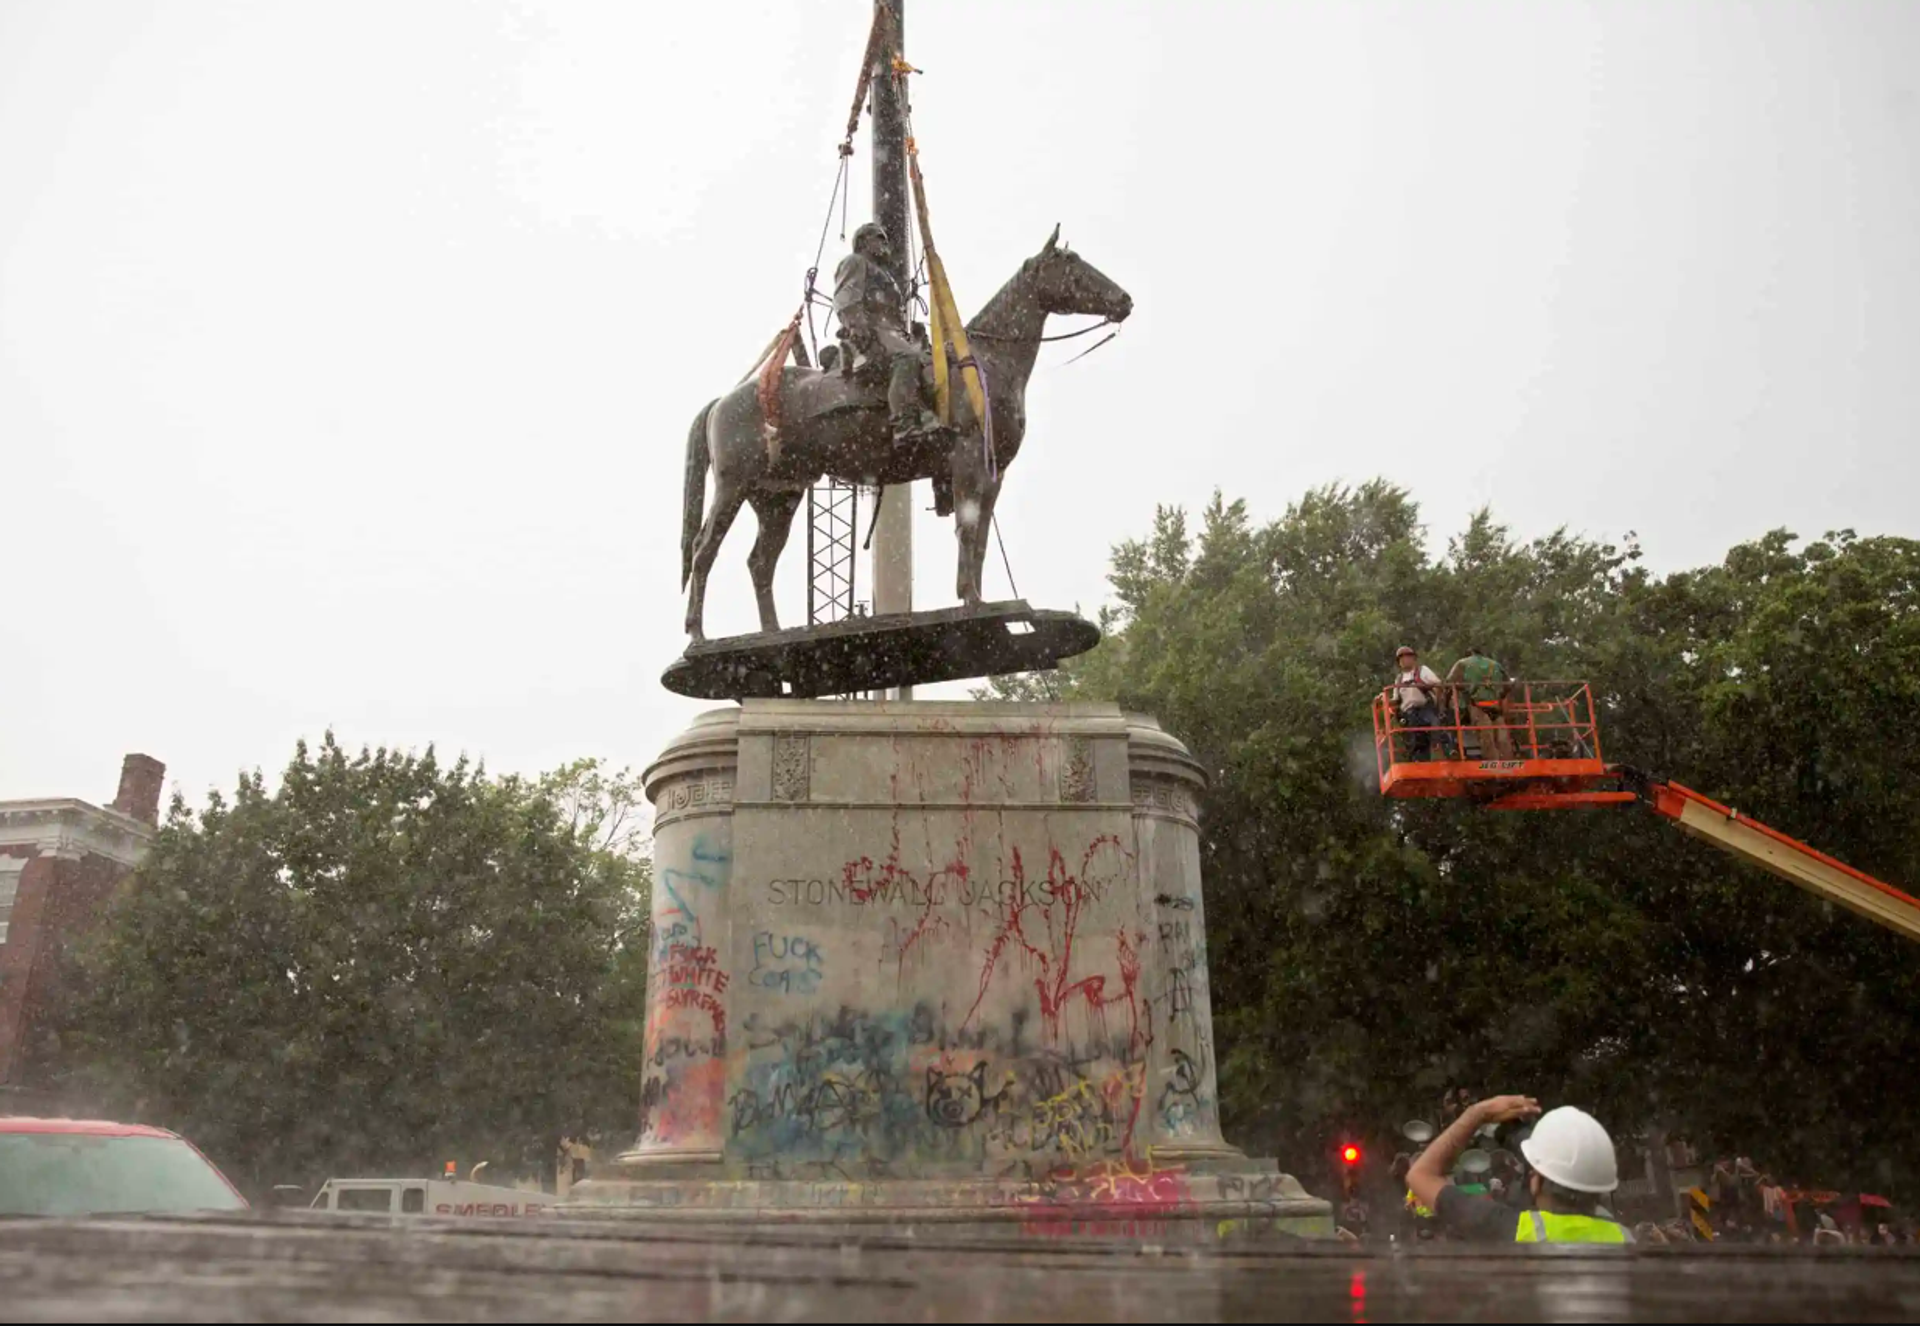 The Stonewall Jackson statue is removed from Monument Avenue in Richmond, Virginia on July 1, 2020. Workers in Richmond, Virginia, removed a statue of Thomas Stonewall Jackson, a Confederate general, after the city's mayor ordered the immediate removal of Confederate monuments - Sputnik International, 1920, 10.02.2024